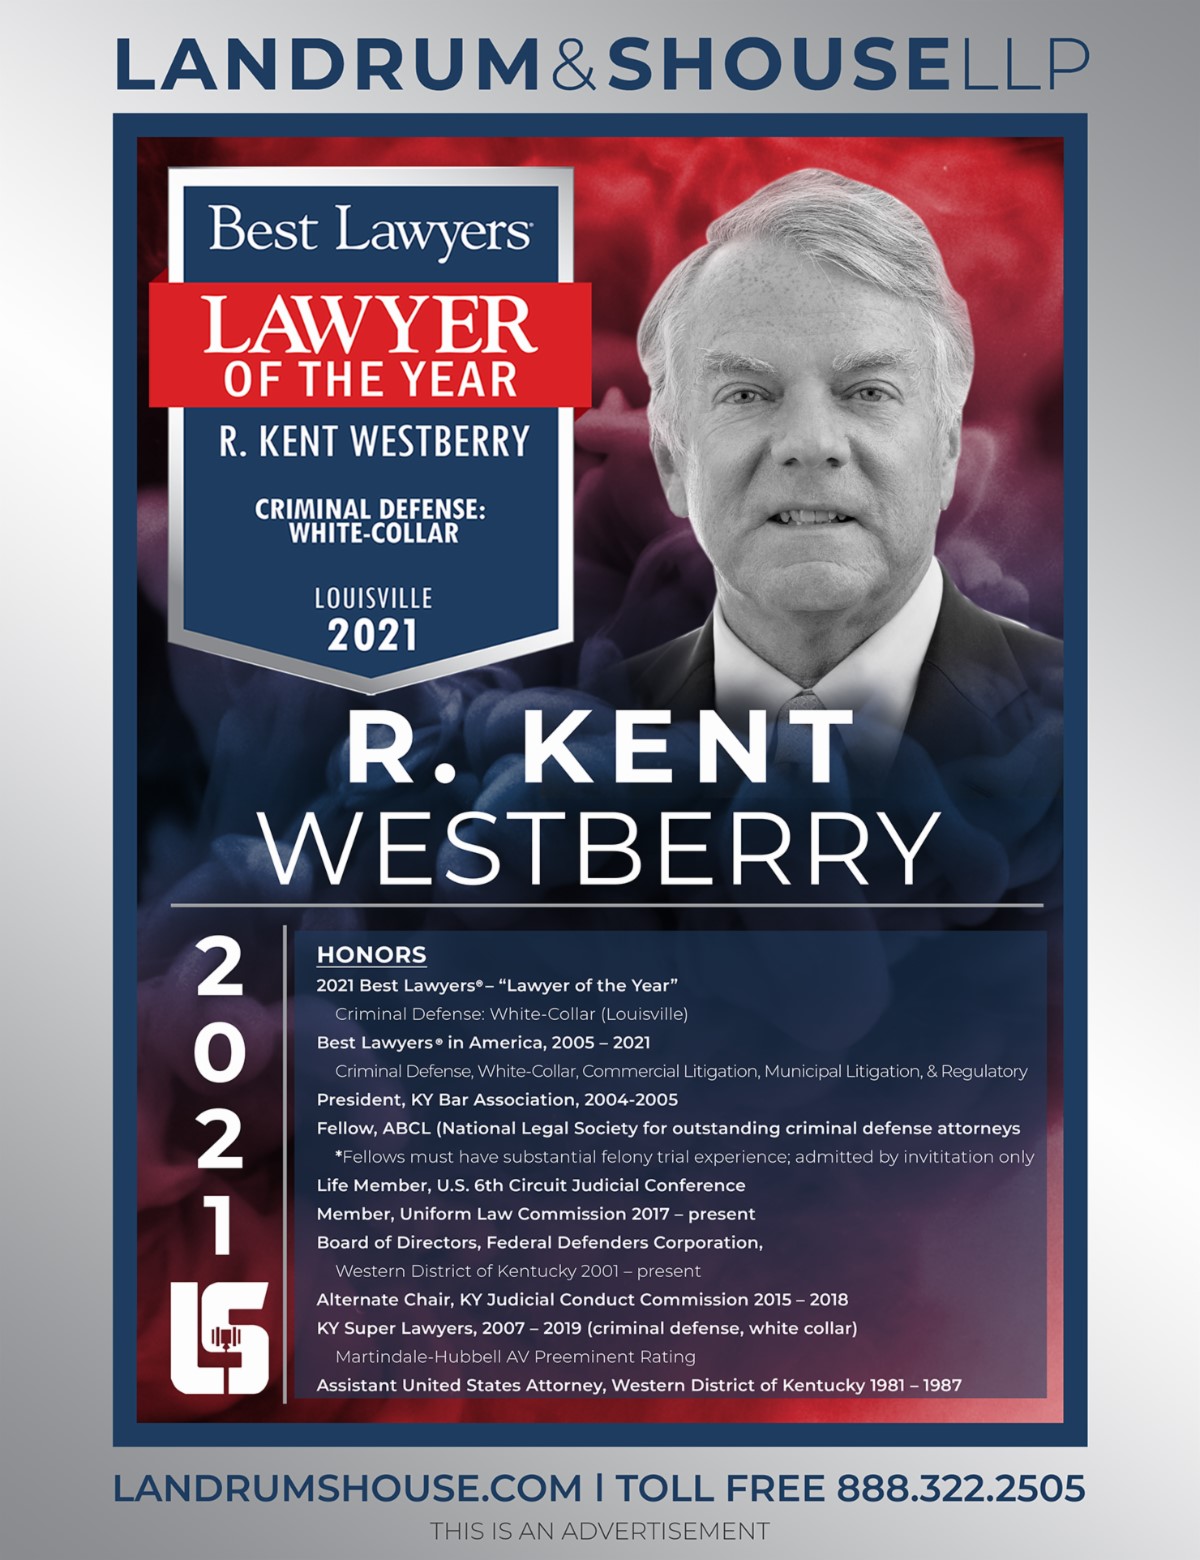 Landrum & Shouse LLP | Best Lawyers Lawyer of the Year R. Kent Westberry Criminal Defense: White-Collar | Louisville 2021